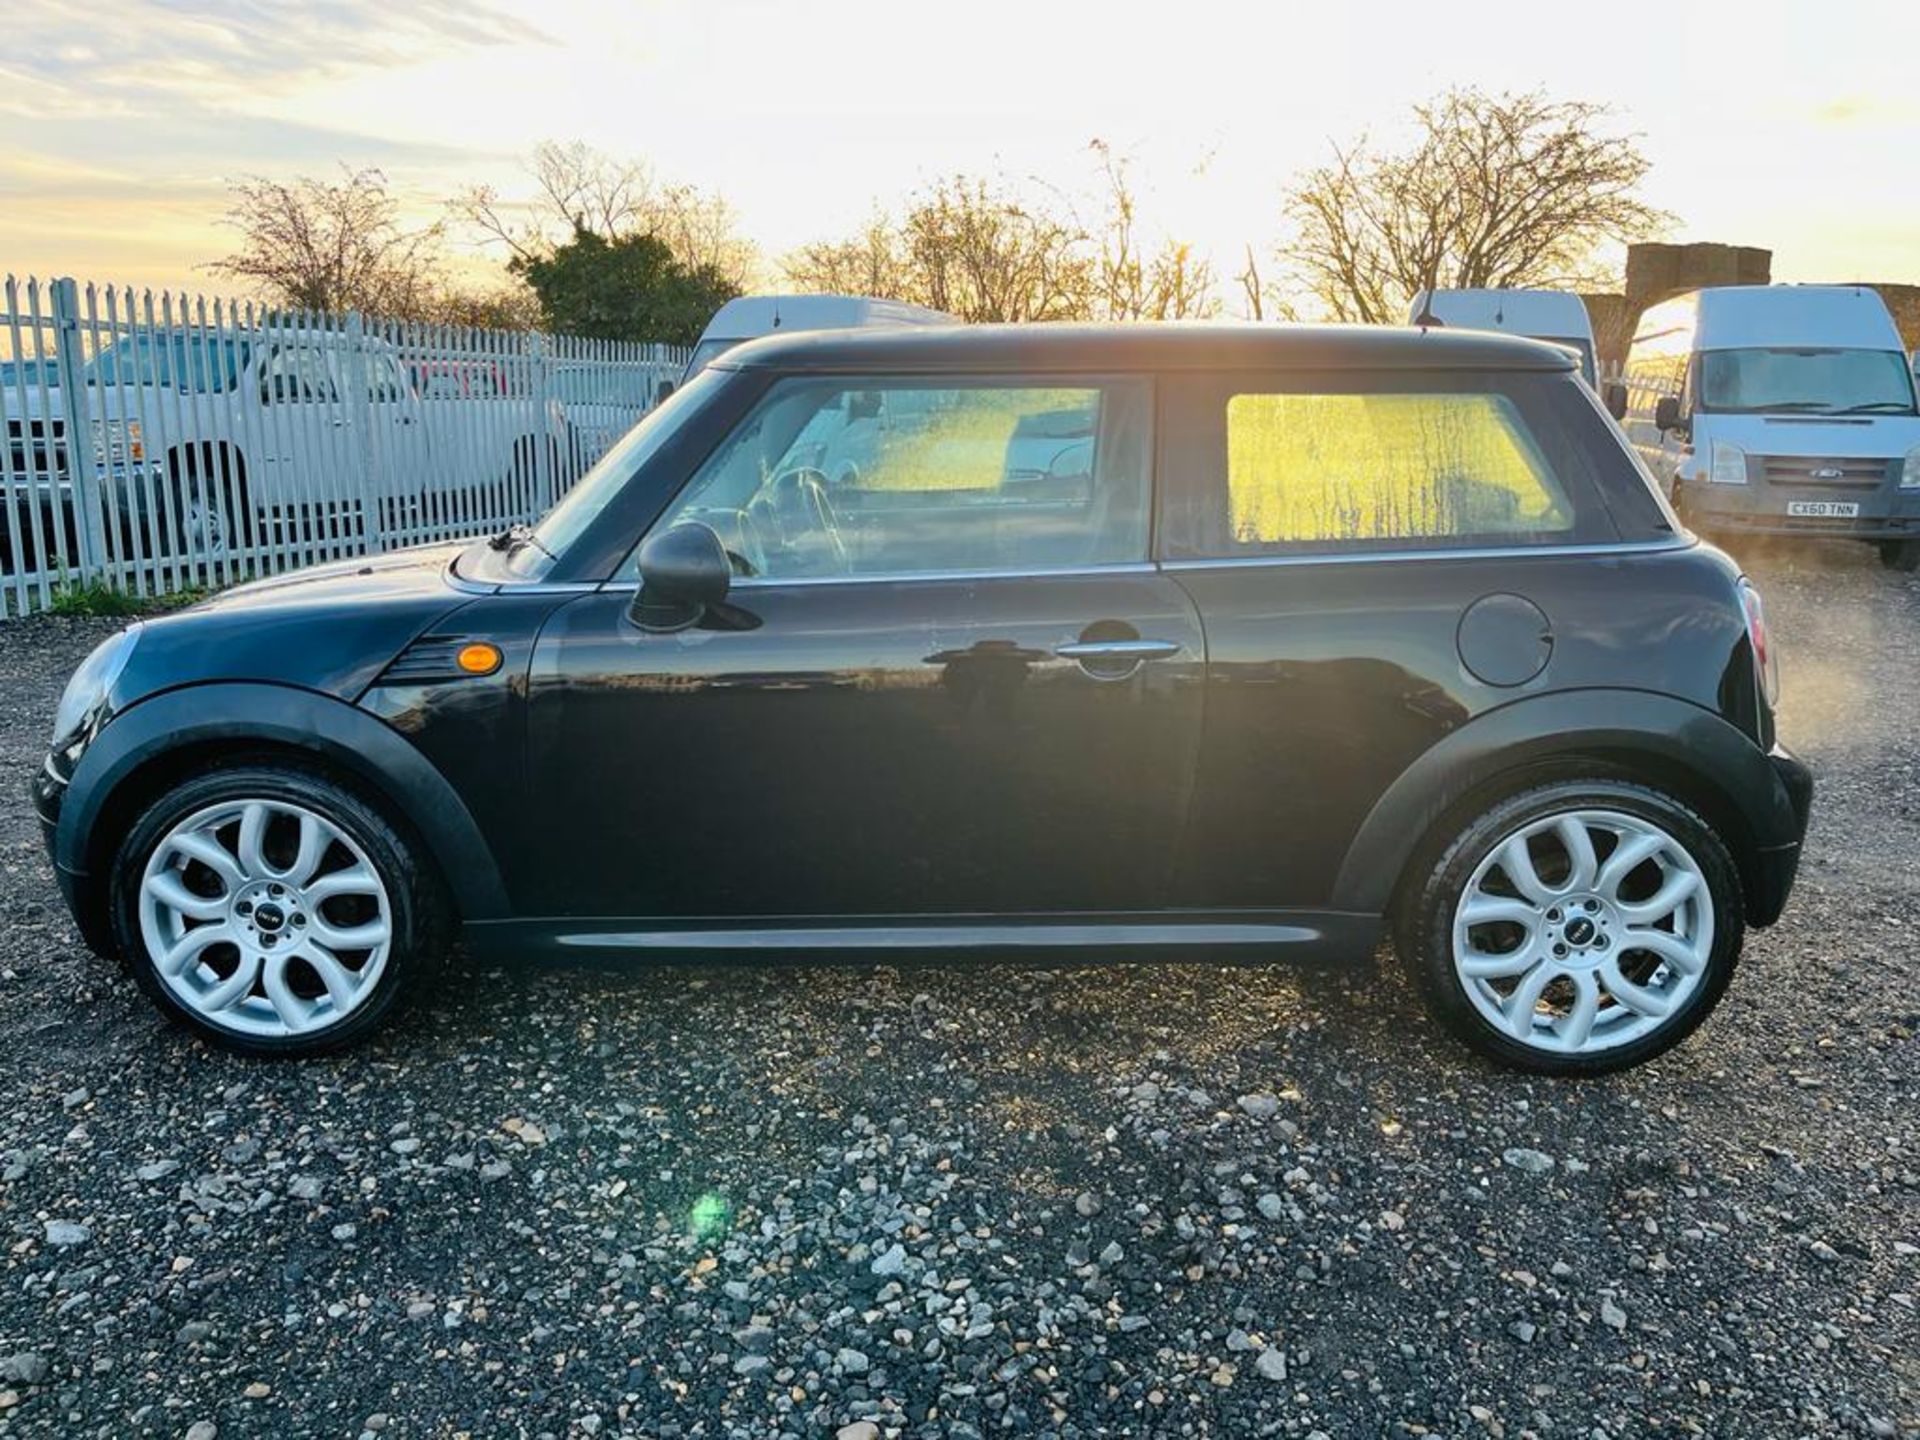 ** ON SALE ** Mini One 1.6 Start/Stop 100 2010 '10 Reg' ' Very Economical' Only 108,430 - No Vat - Image 4 of 26